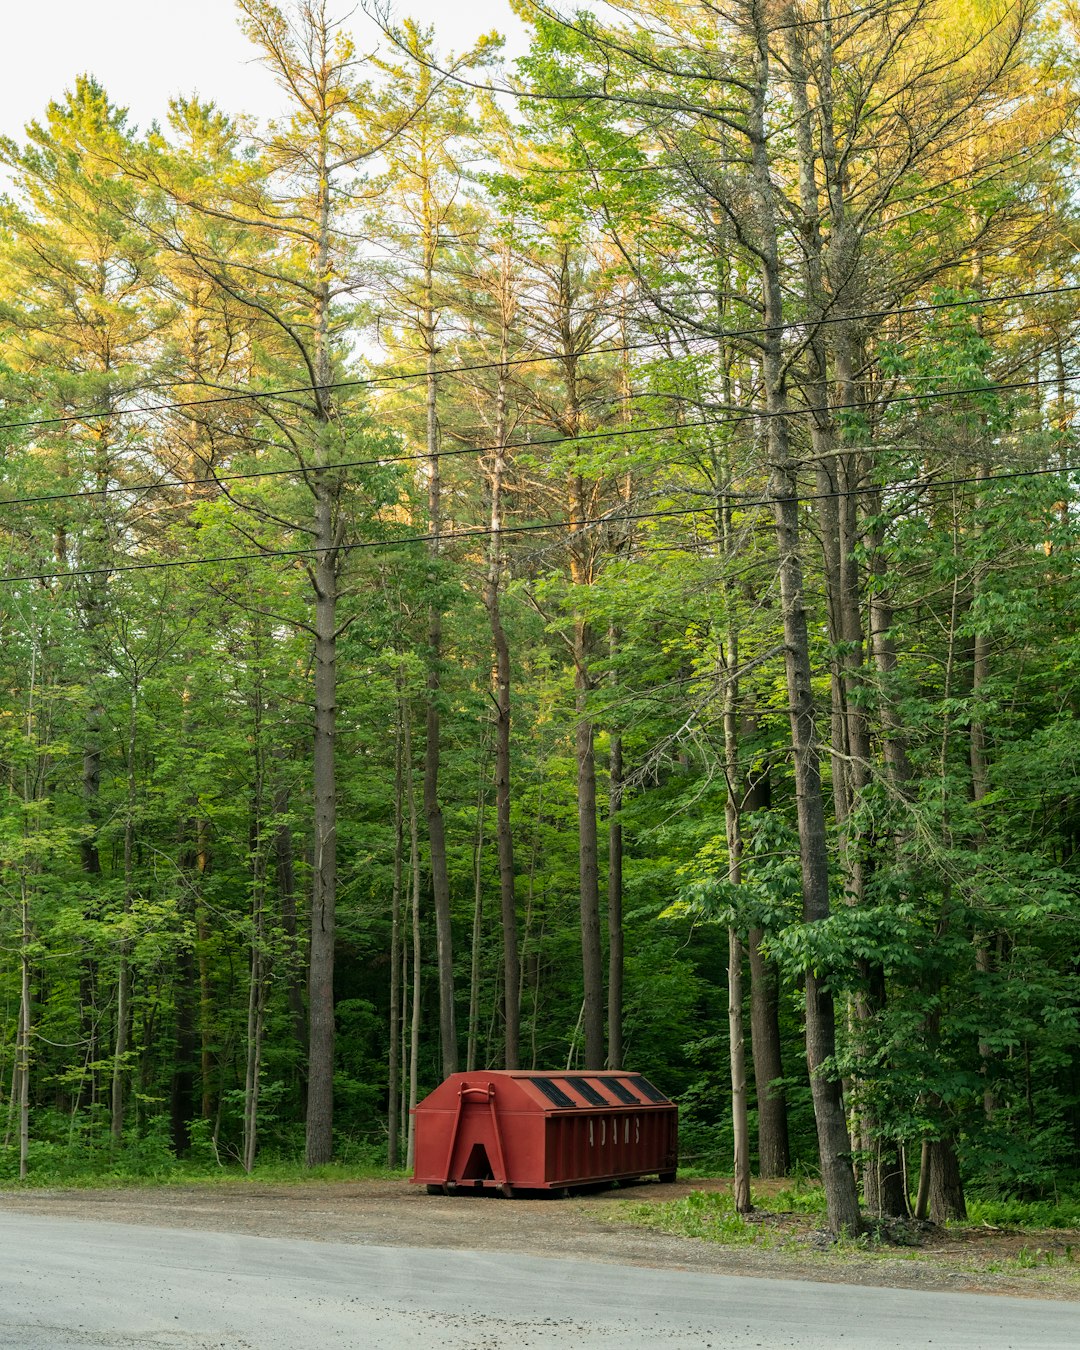 red and brown wooden shed in the middle of forest during daytime